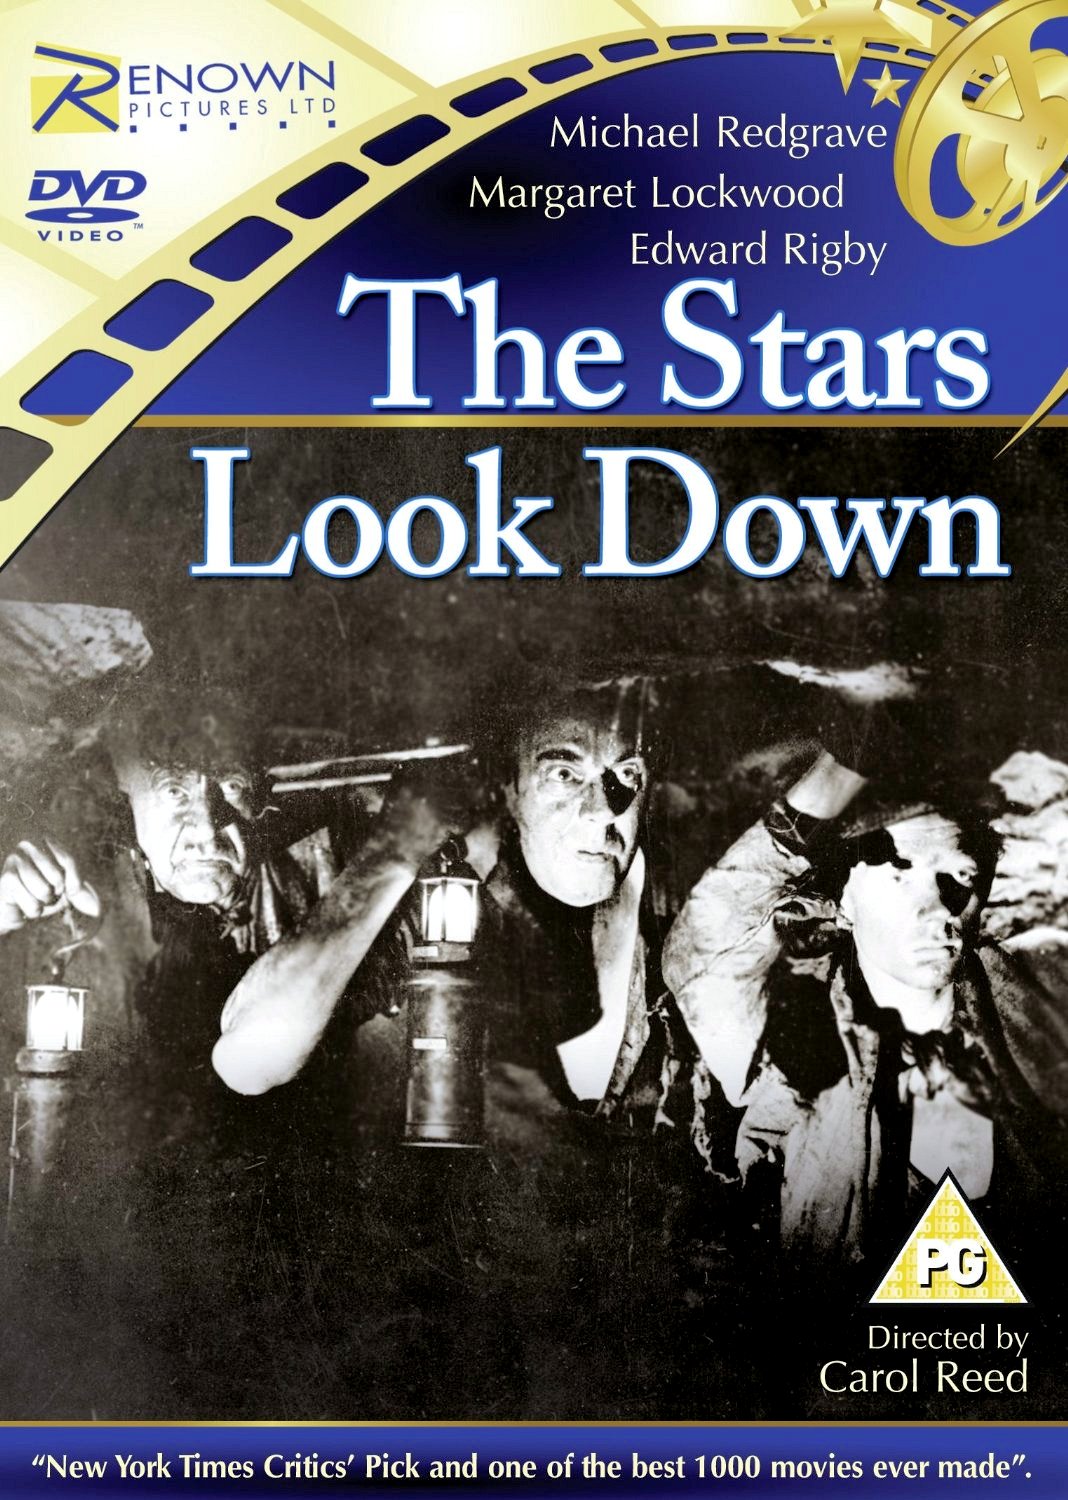 The Stars Look Down DVD from Renown Pictures